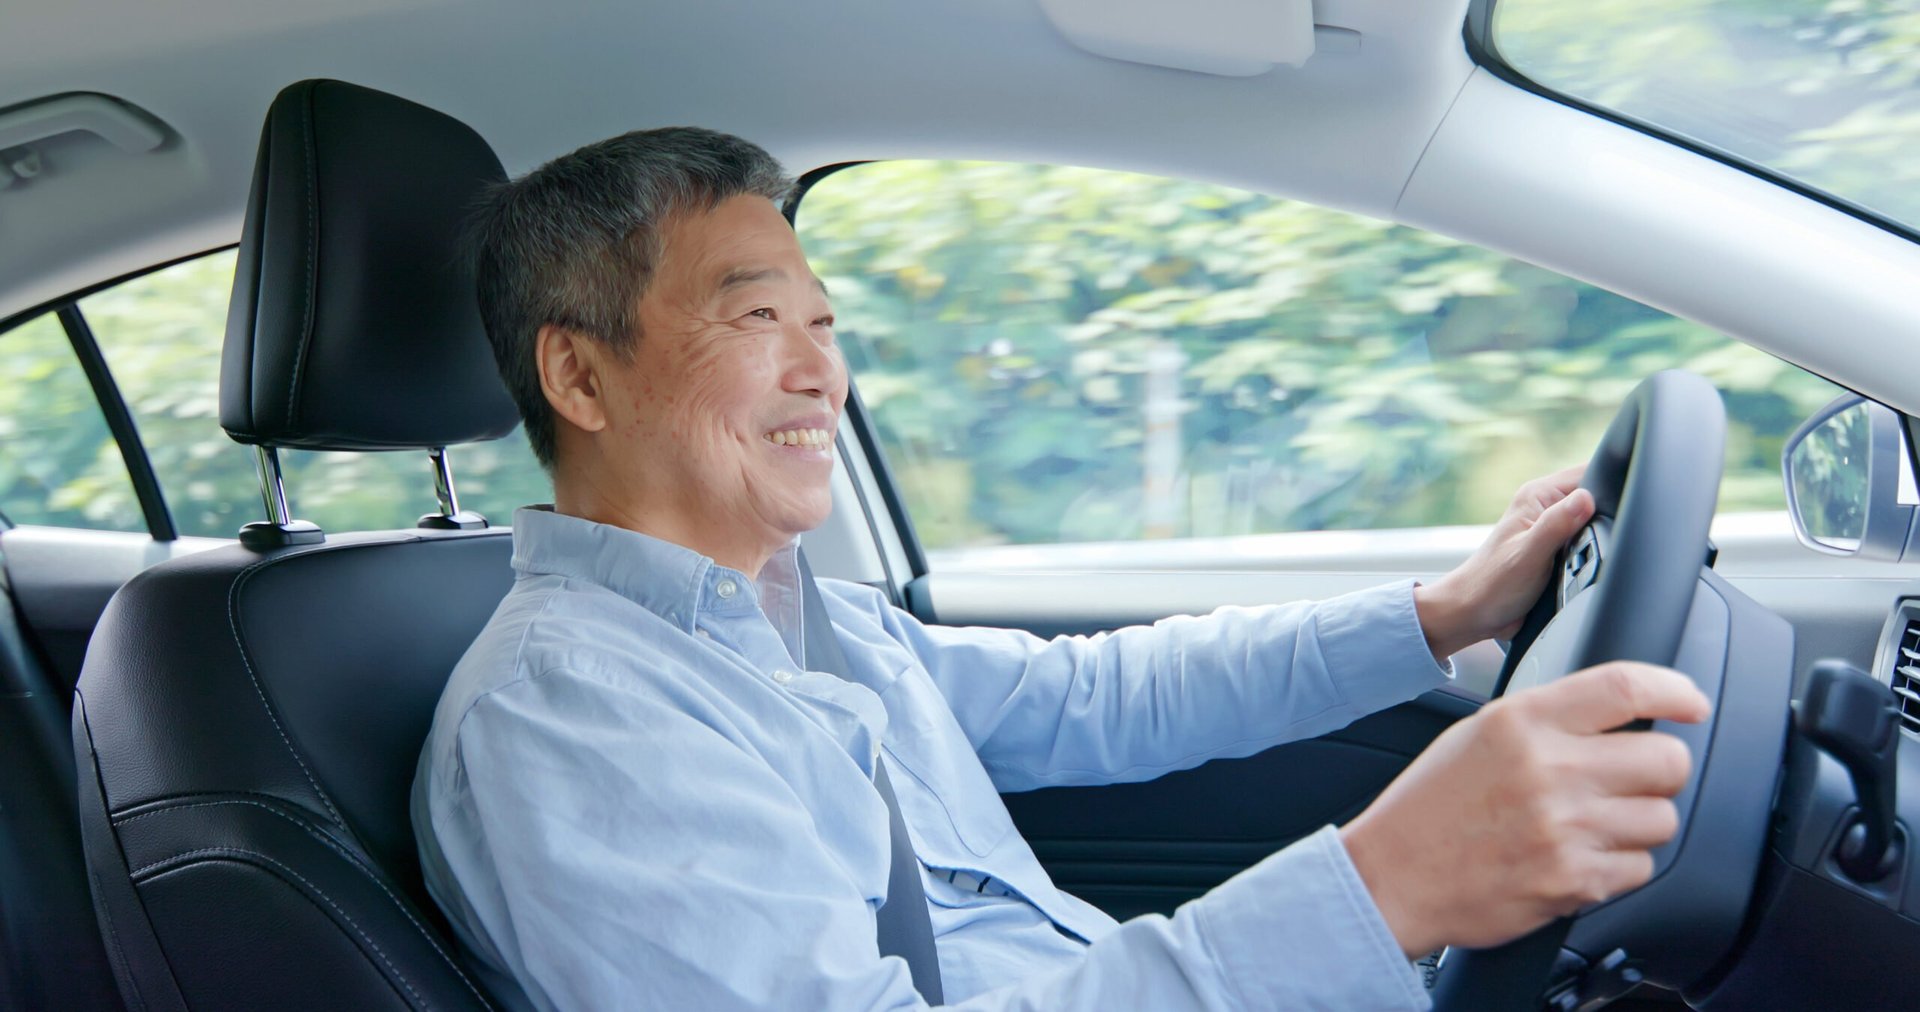 Smiling senior driver in a car on the highway driving for Uber or carrying a passenger